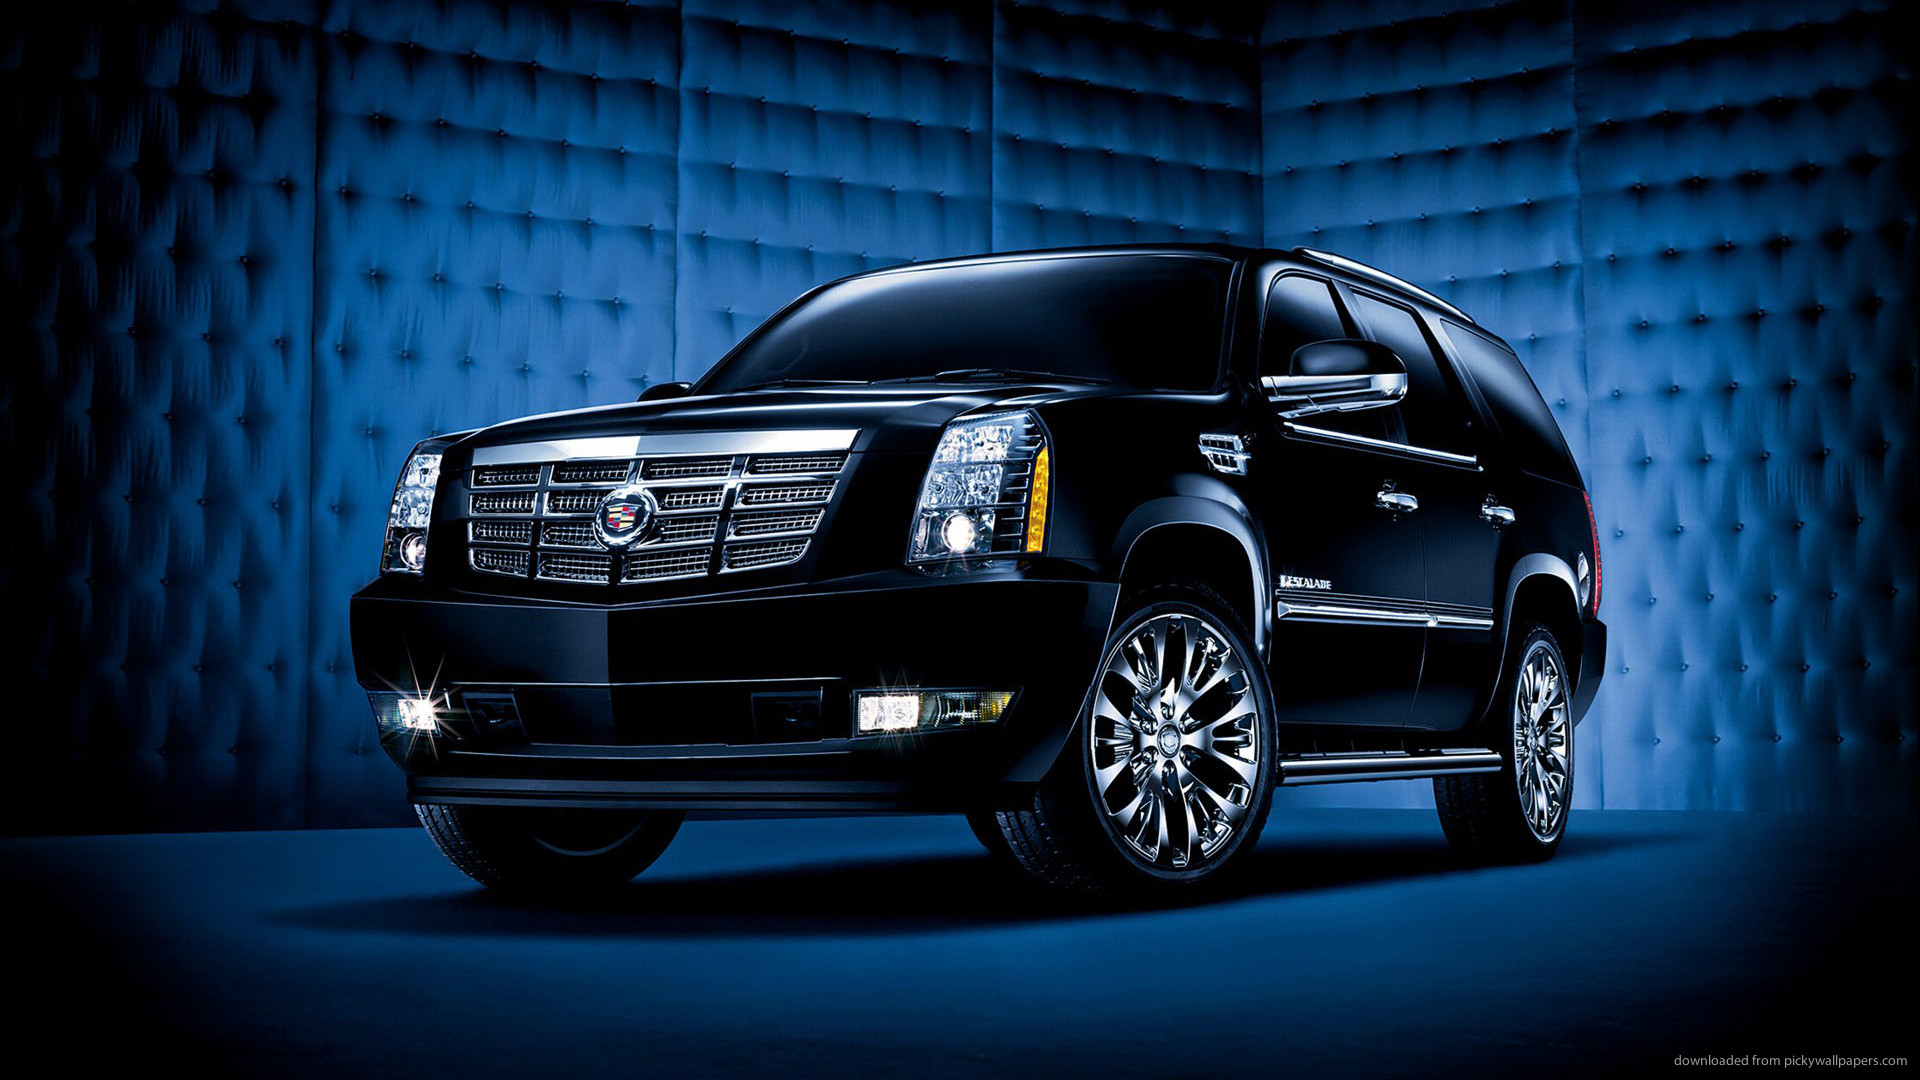 Cadillac Escalade Picture For iPhone Blackberry iPad